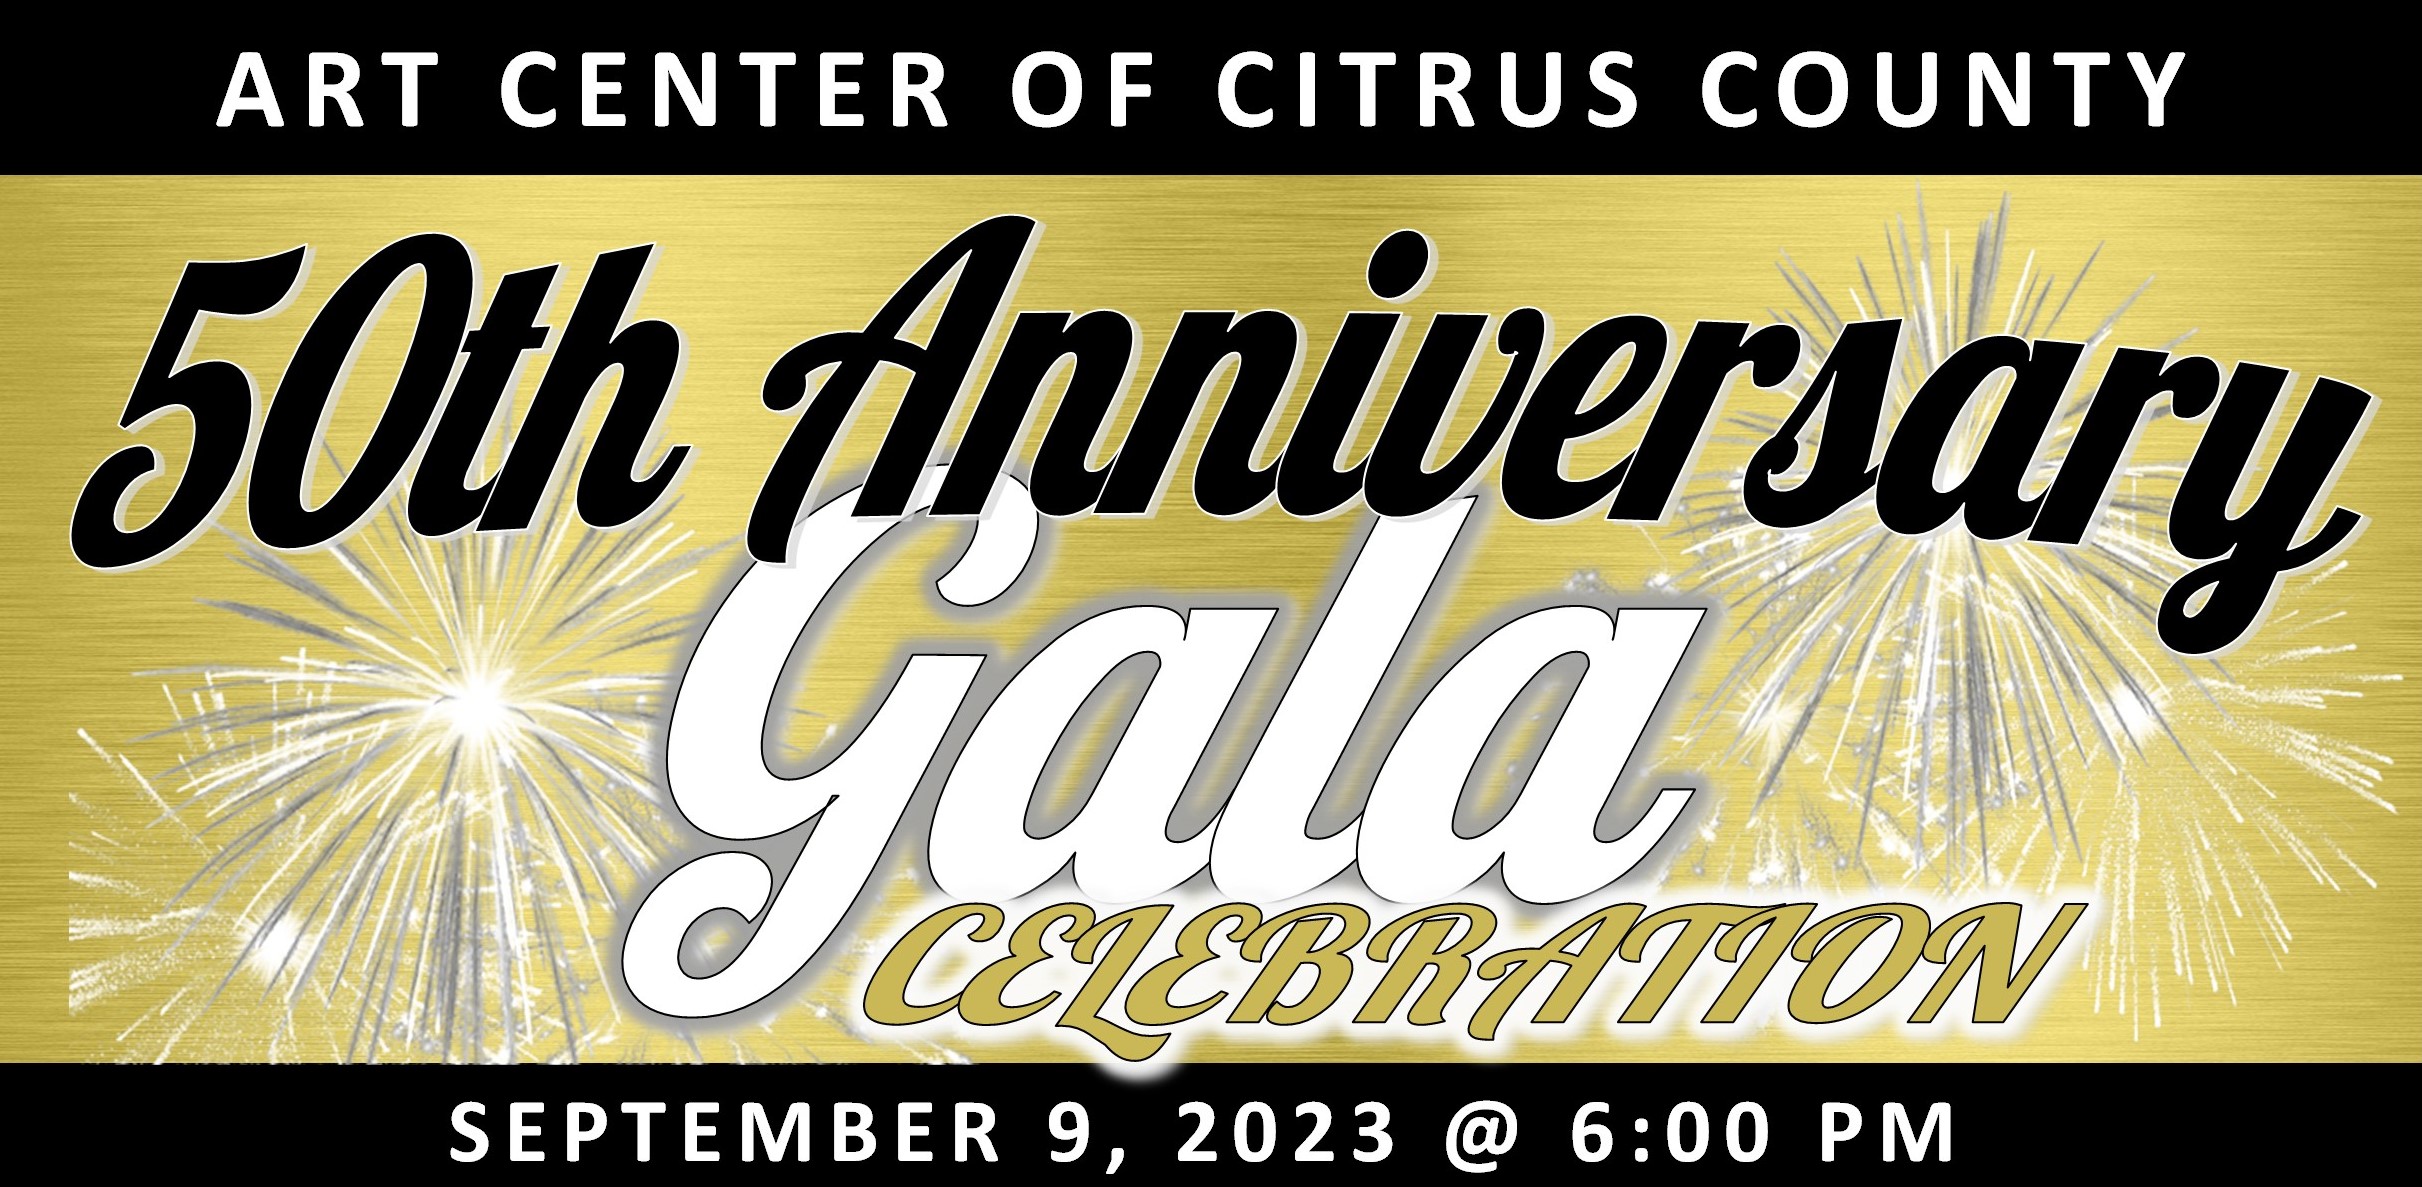 Art Center Theatre and Gallery 50th Anniversary Gala Celebration September, 9 @ 6:00PM